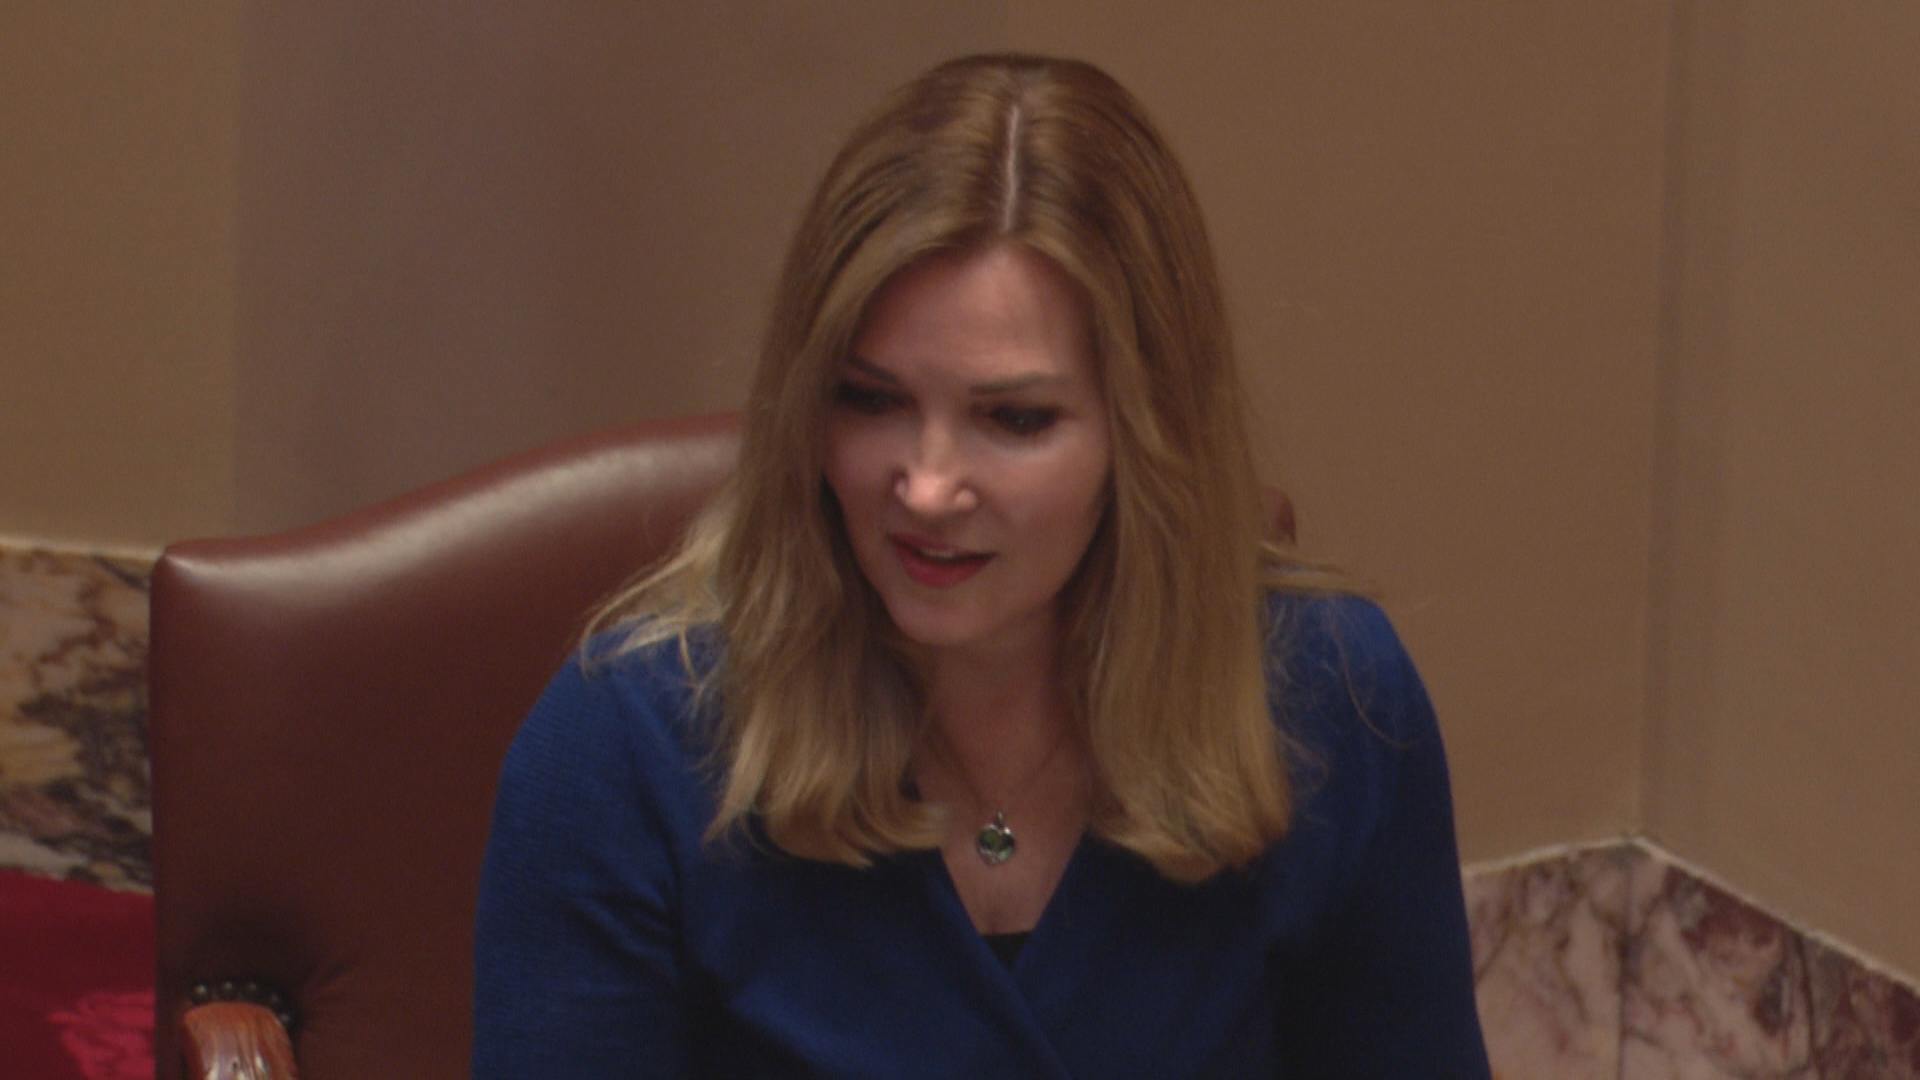 It's Mitchell's first time back on the Senate floor since being charged with burglary, an allegation she denies.